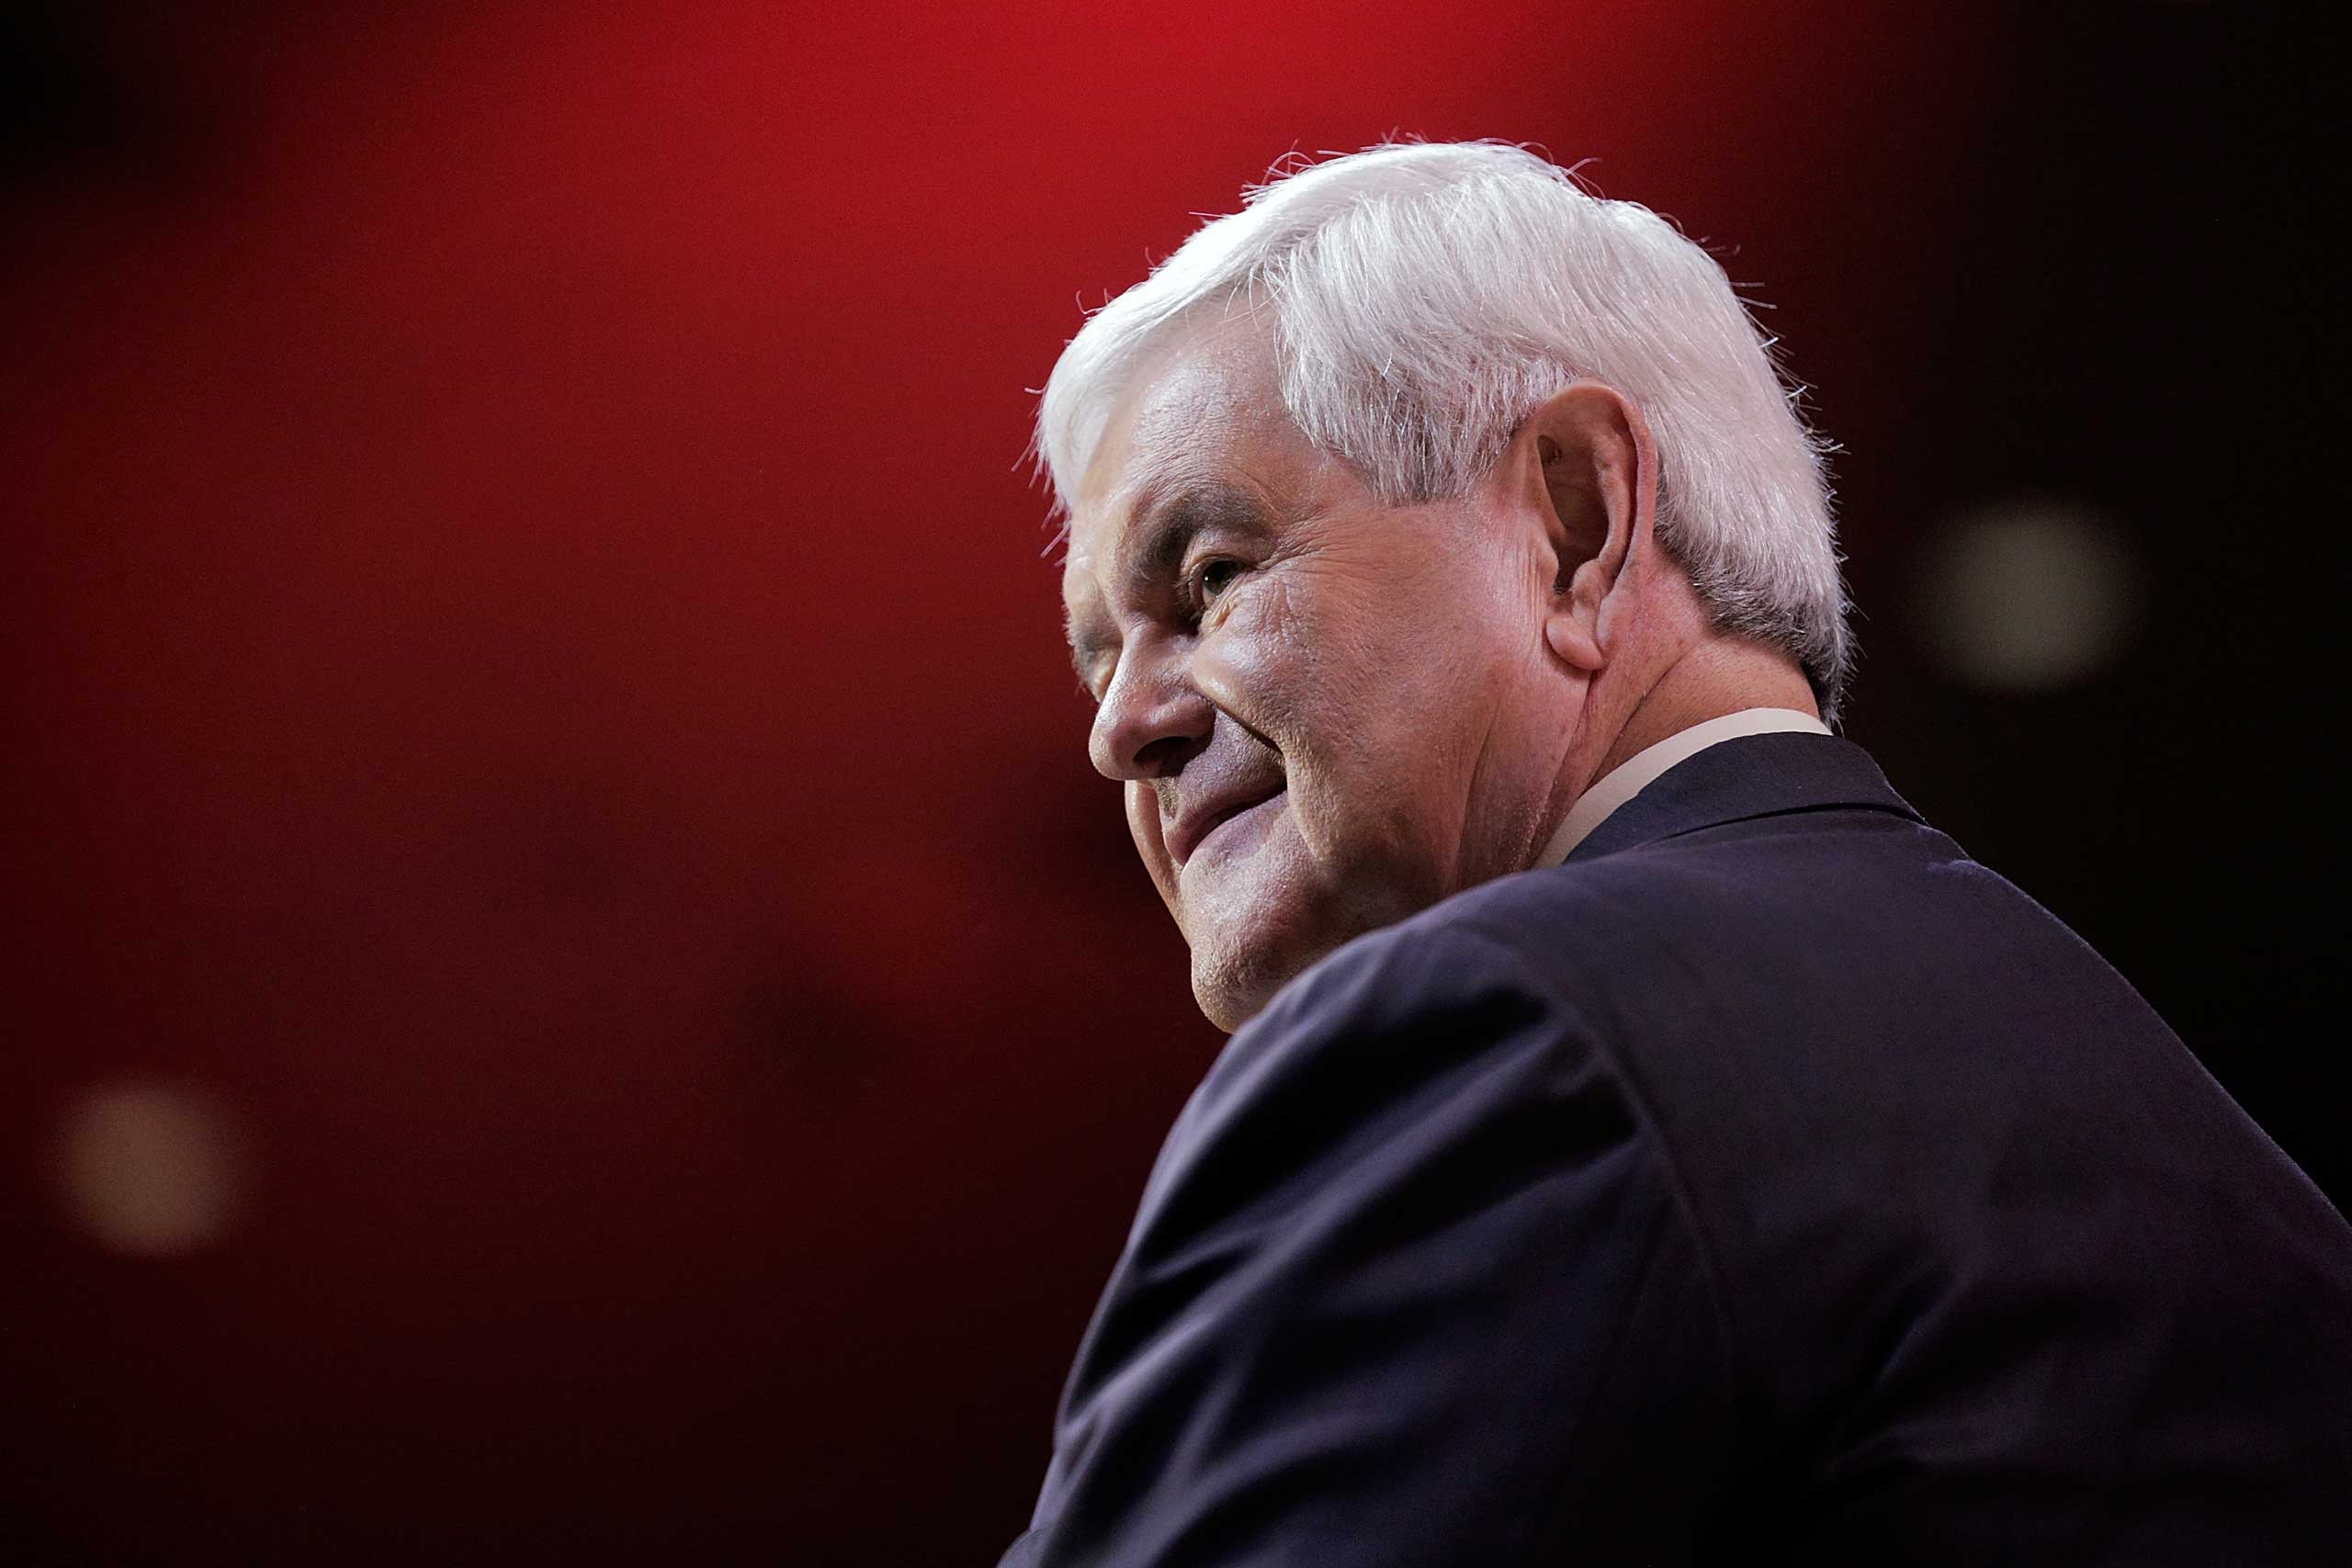 Speaker Newt Gingrich (R-Ga.) was formally reprimanded by the House and forced to pay a $300,000 penalty for violating tax law and lying to the investigating panel.  He didn’t resign over the scandal, but it weakened his support among his Republican base.